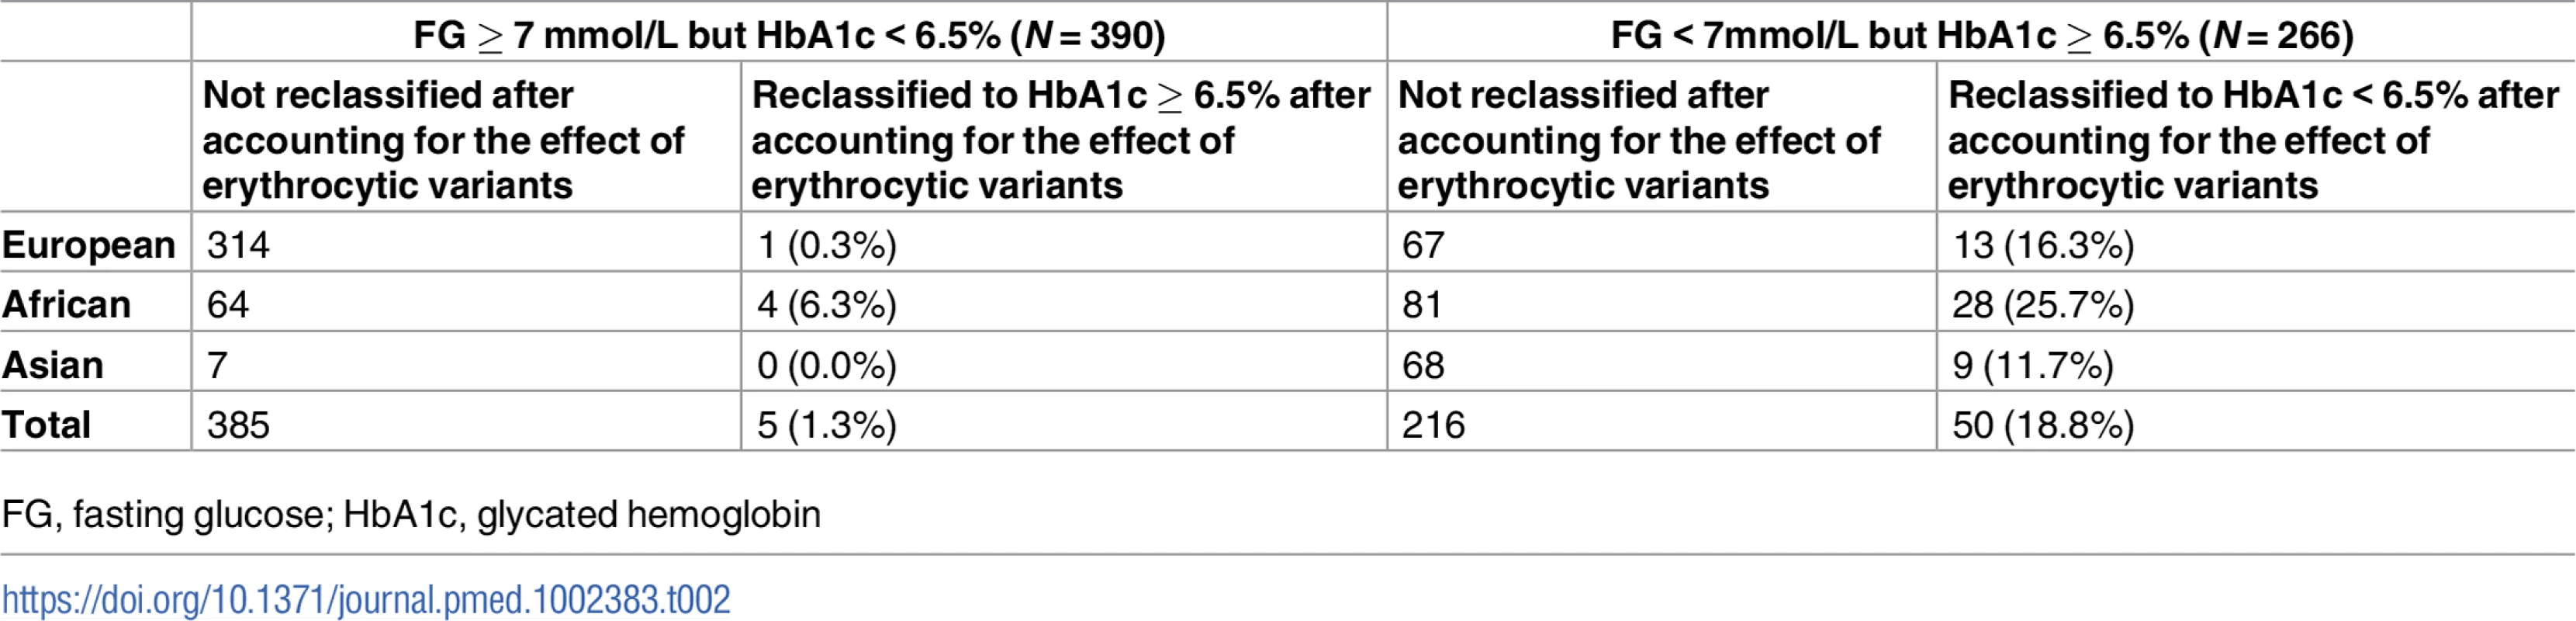 Reclassification of individuals with discordant T2D status based on prevailing diagnostic thresholds for FG and HbA1c before and after accounting for the effect of erythrocytic variants.